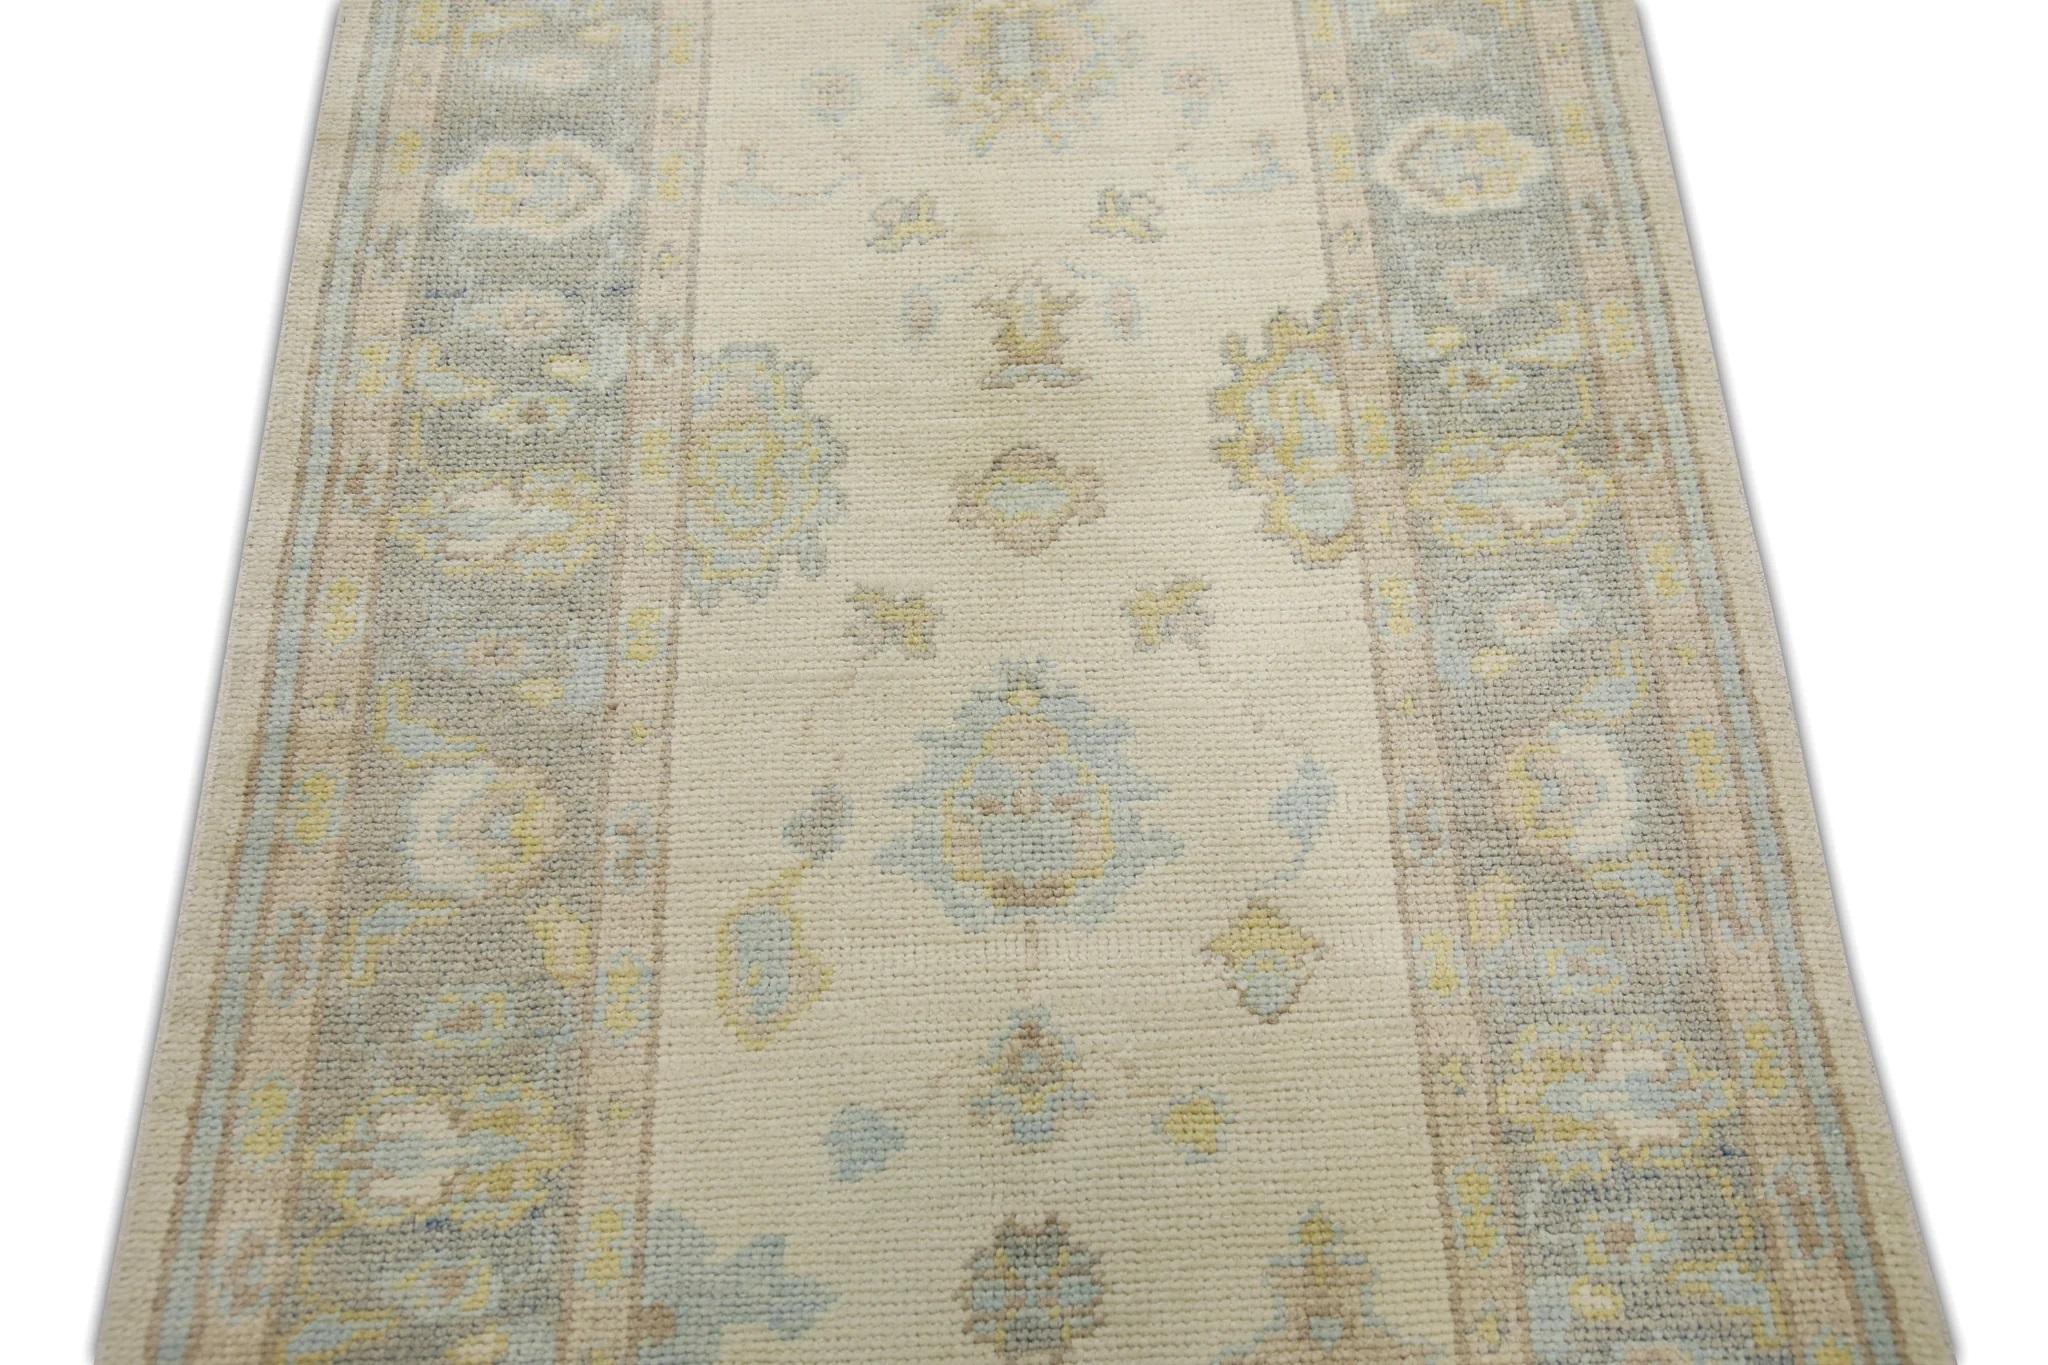 Blue and Yellow Handwoven Wool Floral Design Turkish Oushak Rug 3' x 7'10